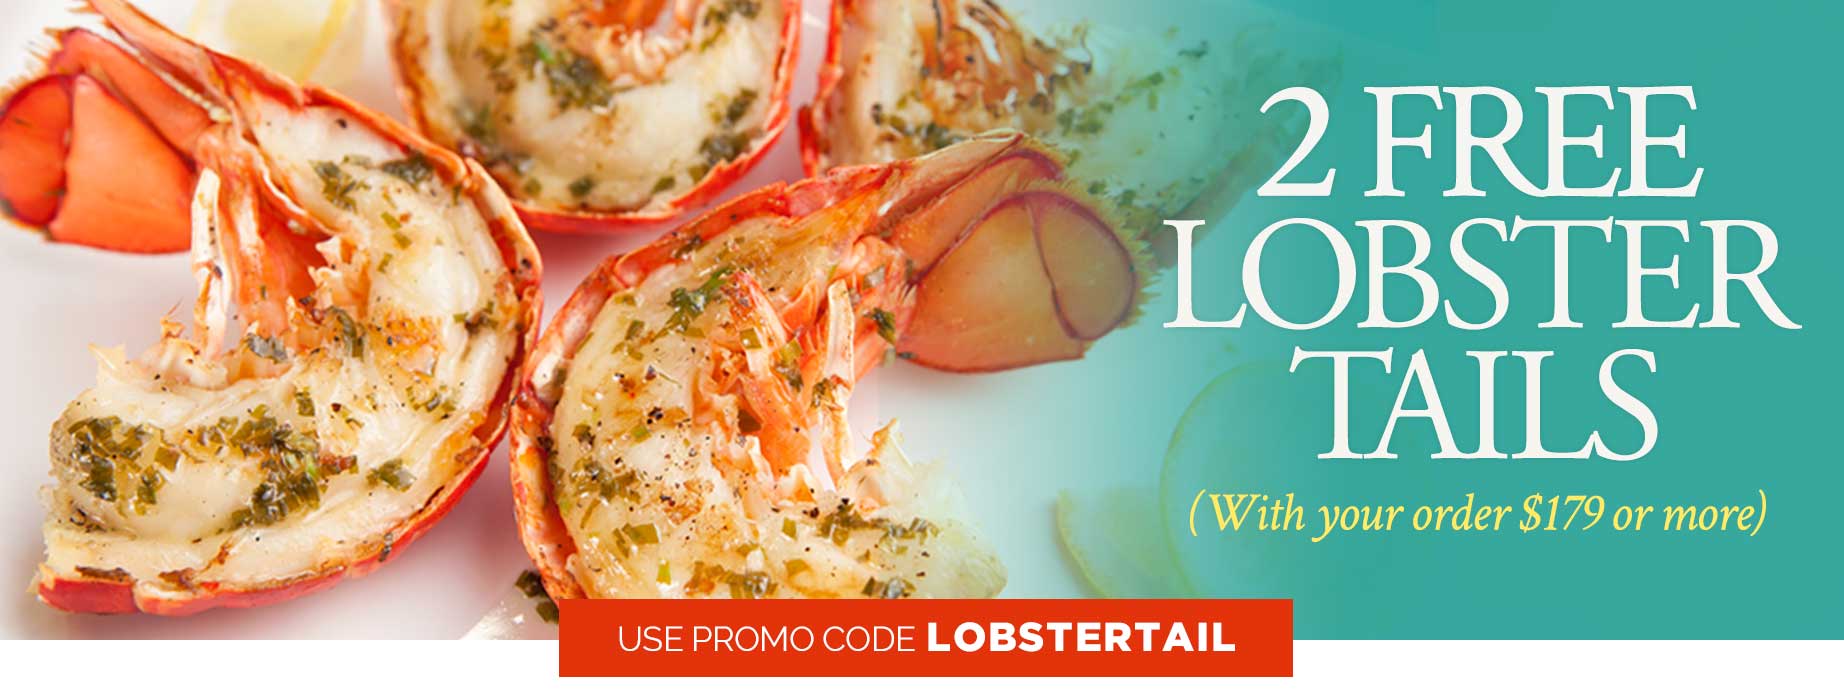 2 FREE Lobster Tails on orders $179+ Use Code: LOBSTERTAIL